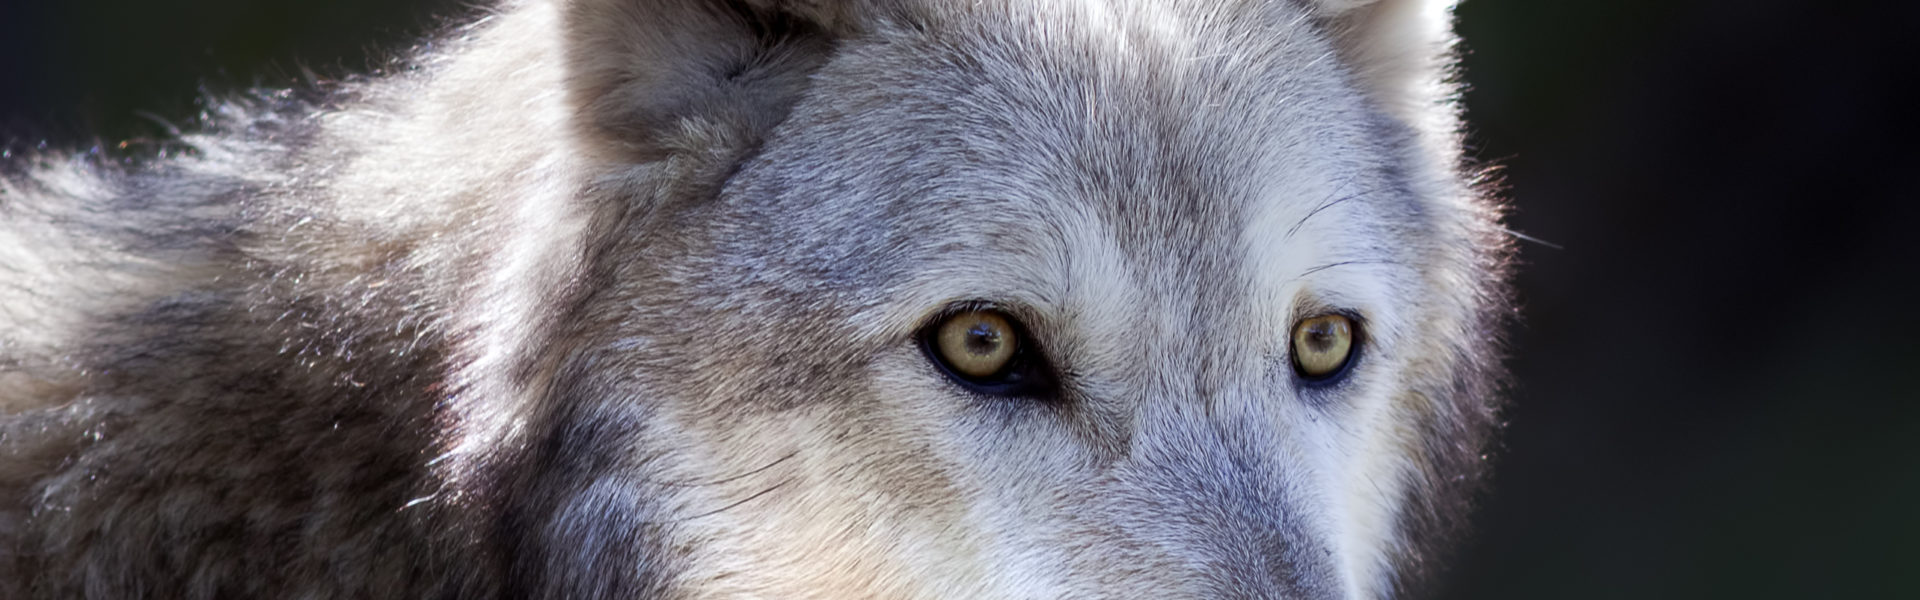 Public comments wanted on mountain lion and gray wolf hunting ...